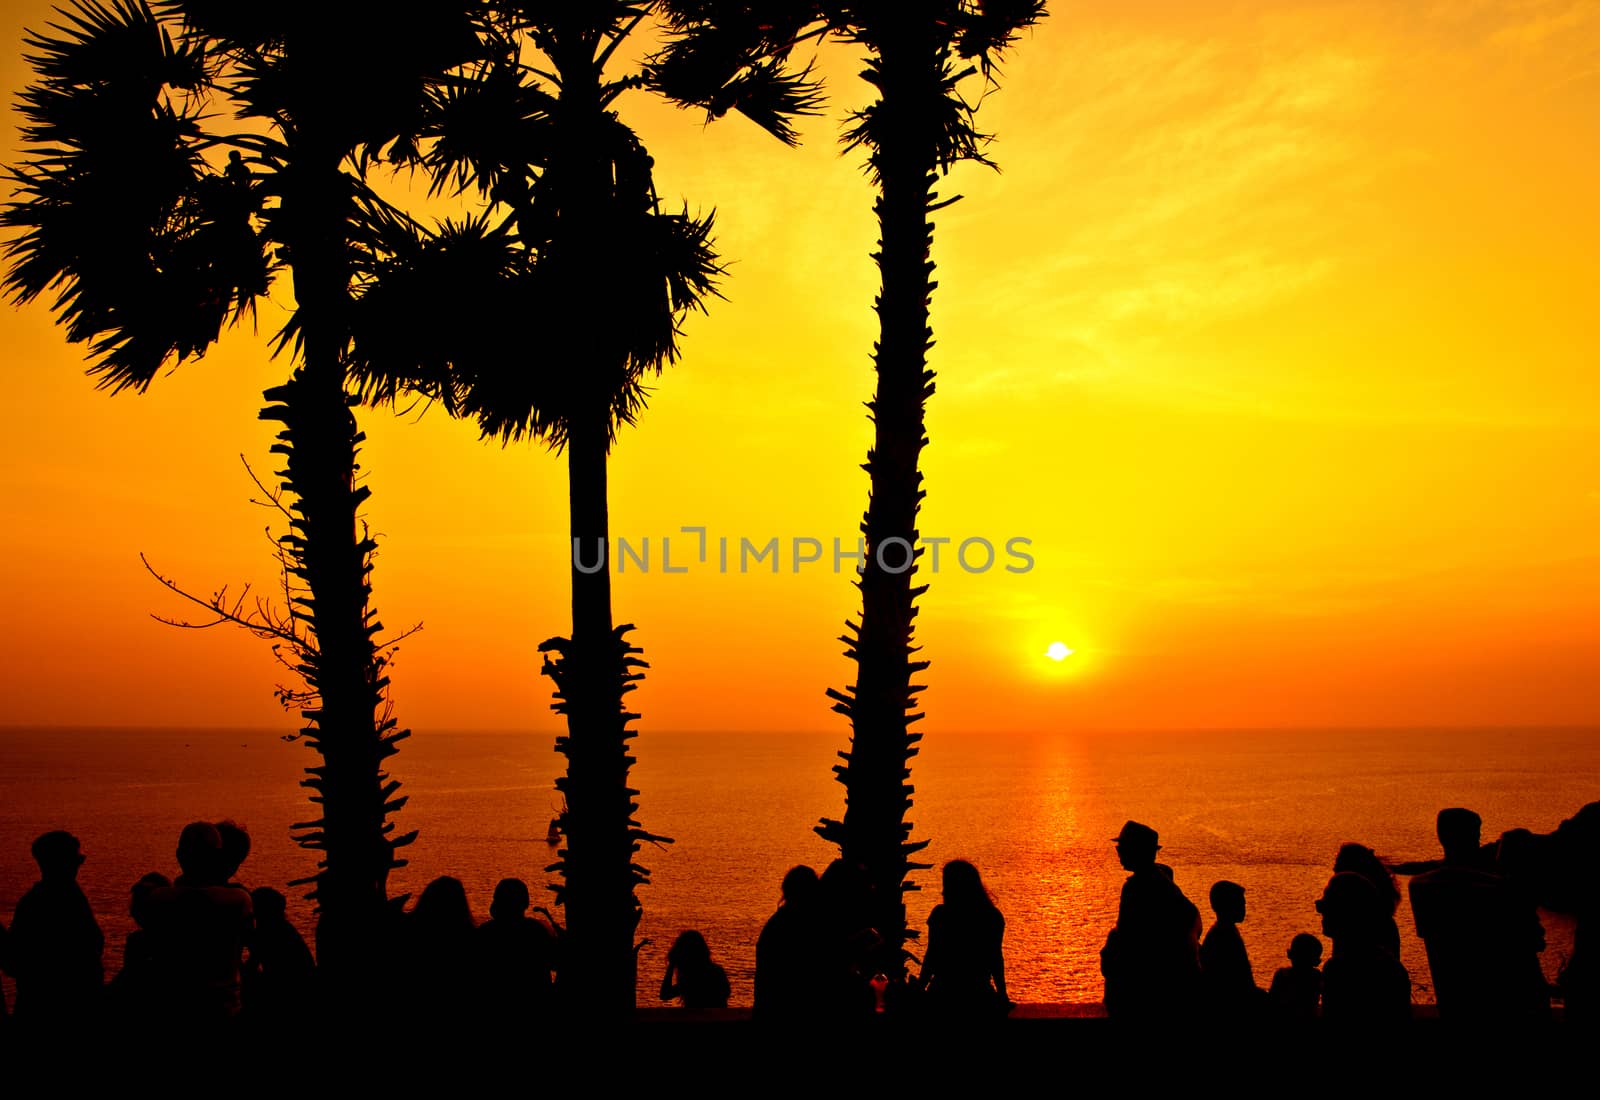 Silhouette with color of the sunset, Lan prom thep view point(Name thai),  Phuket Thailand